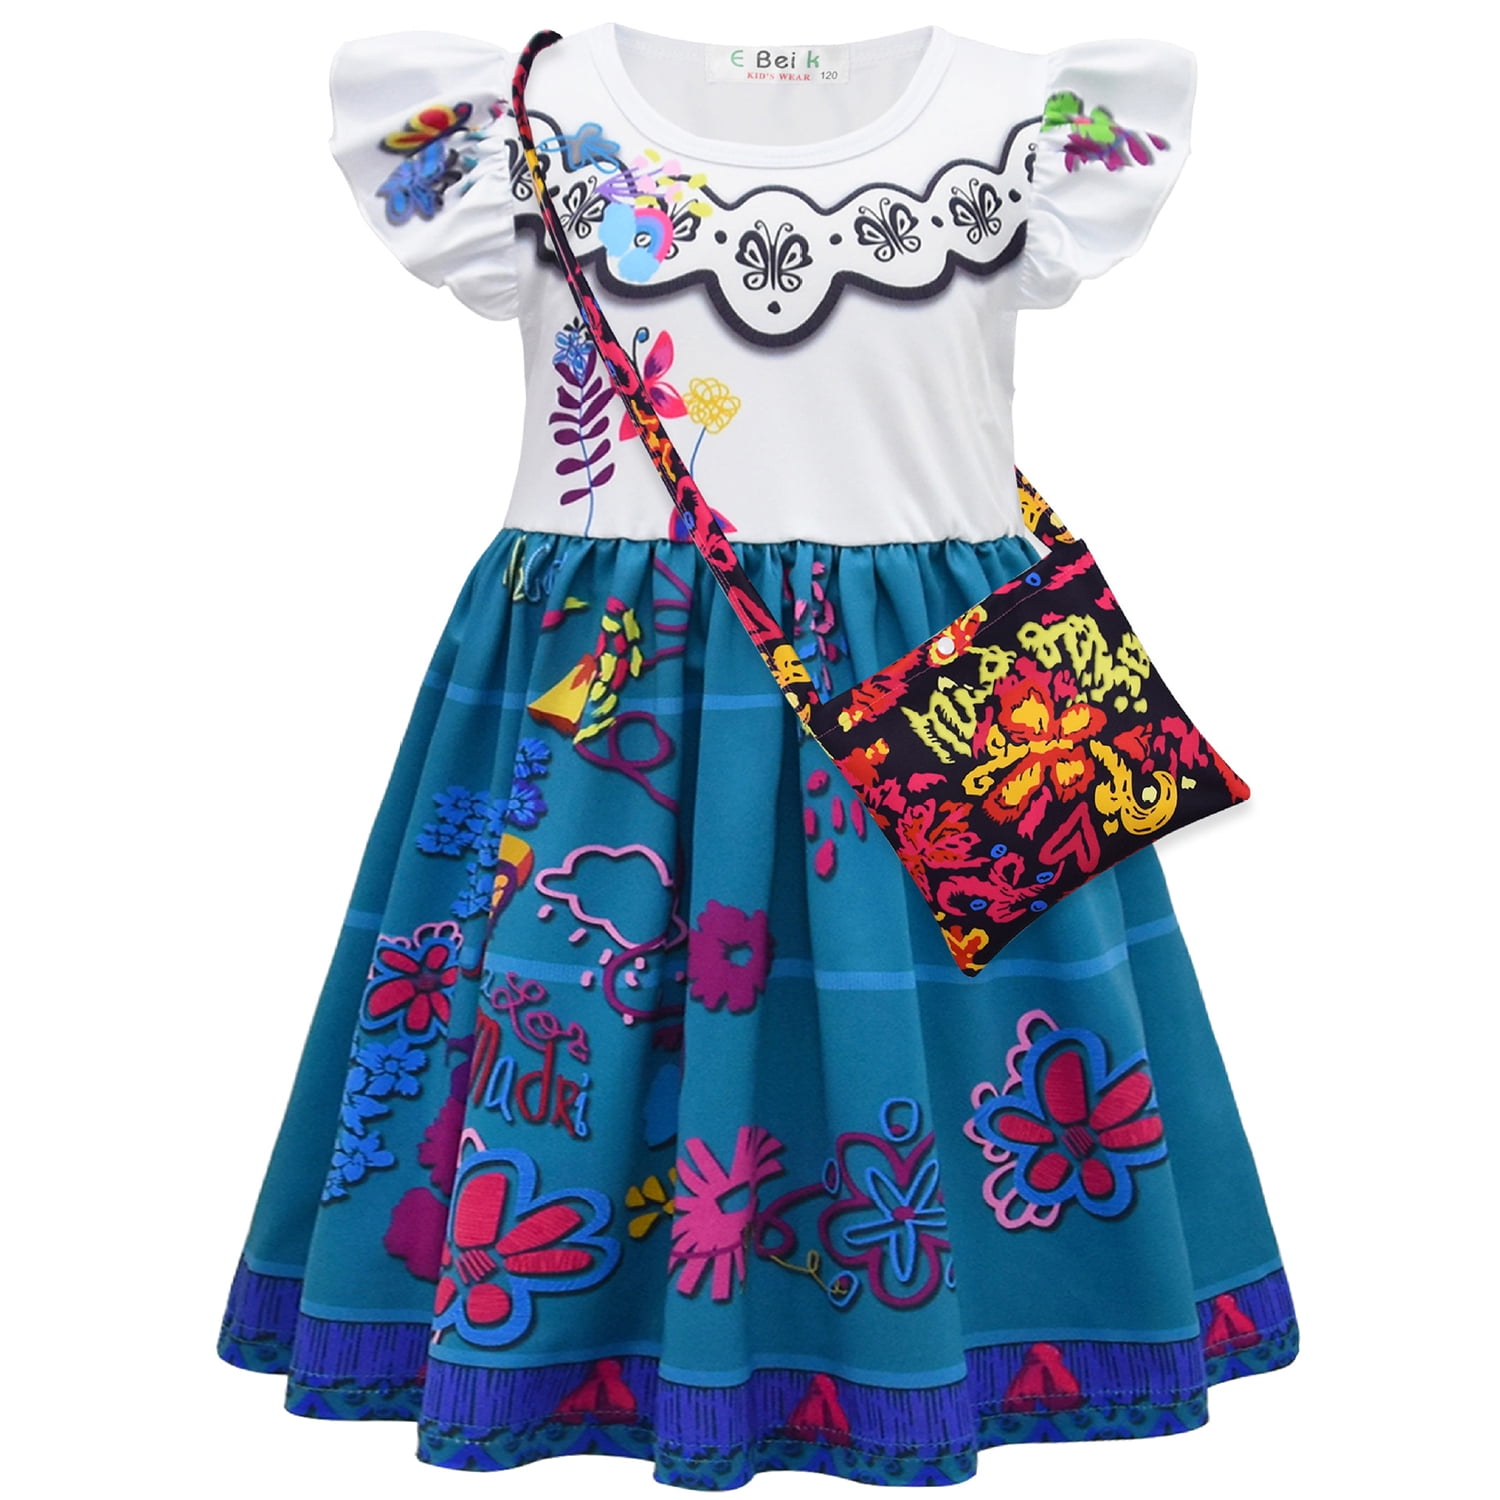 Mirabel Costume Encanto Dress for Girls Madrigal Cosplay outfits